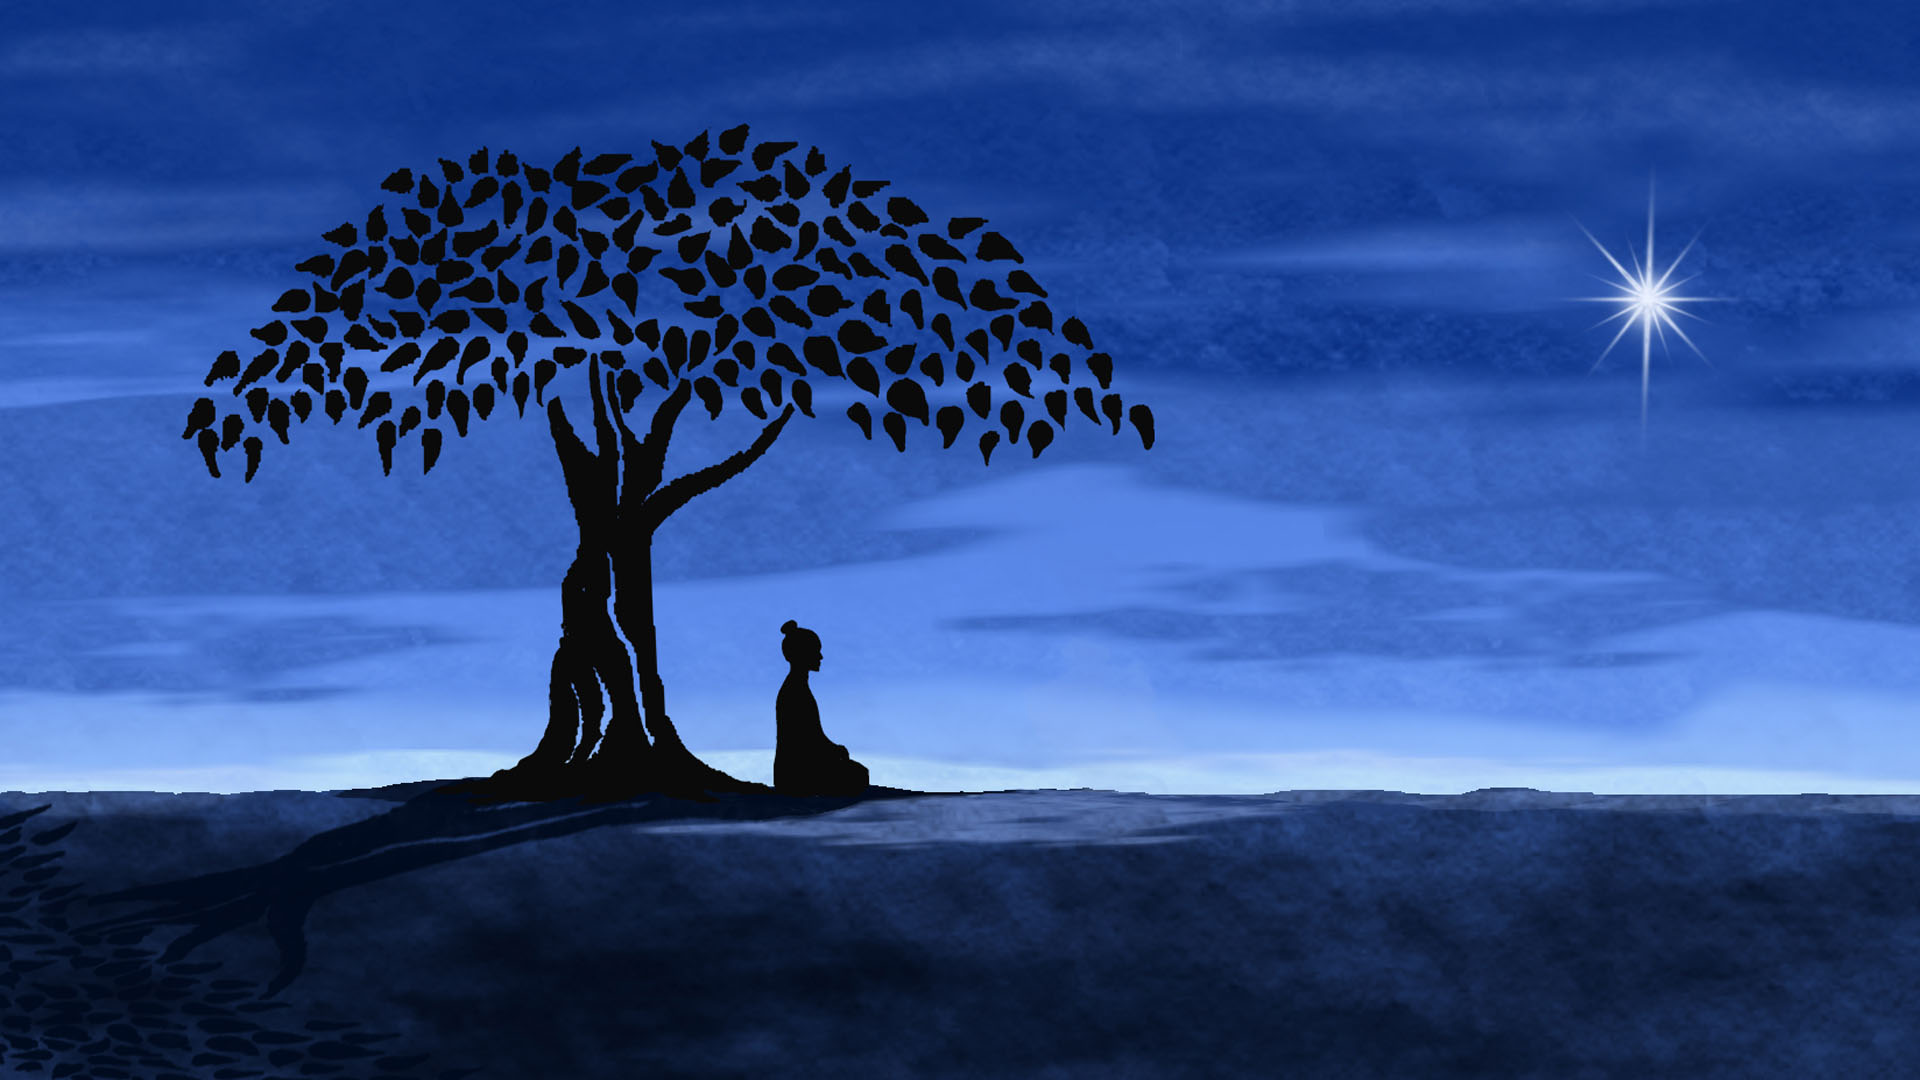 Bhudda Backgrounds, Compatible - PC, Mobile, Gadgets| 1920x1080 px